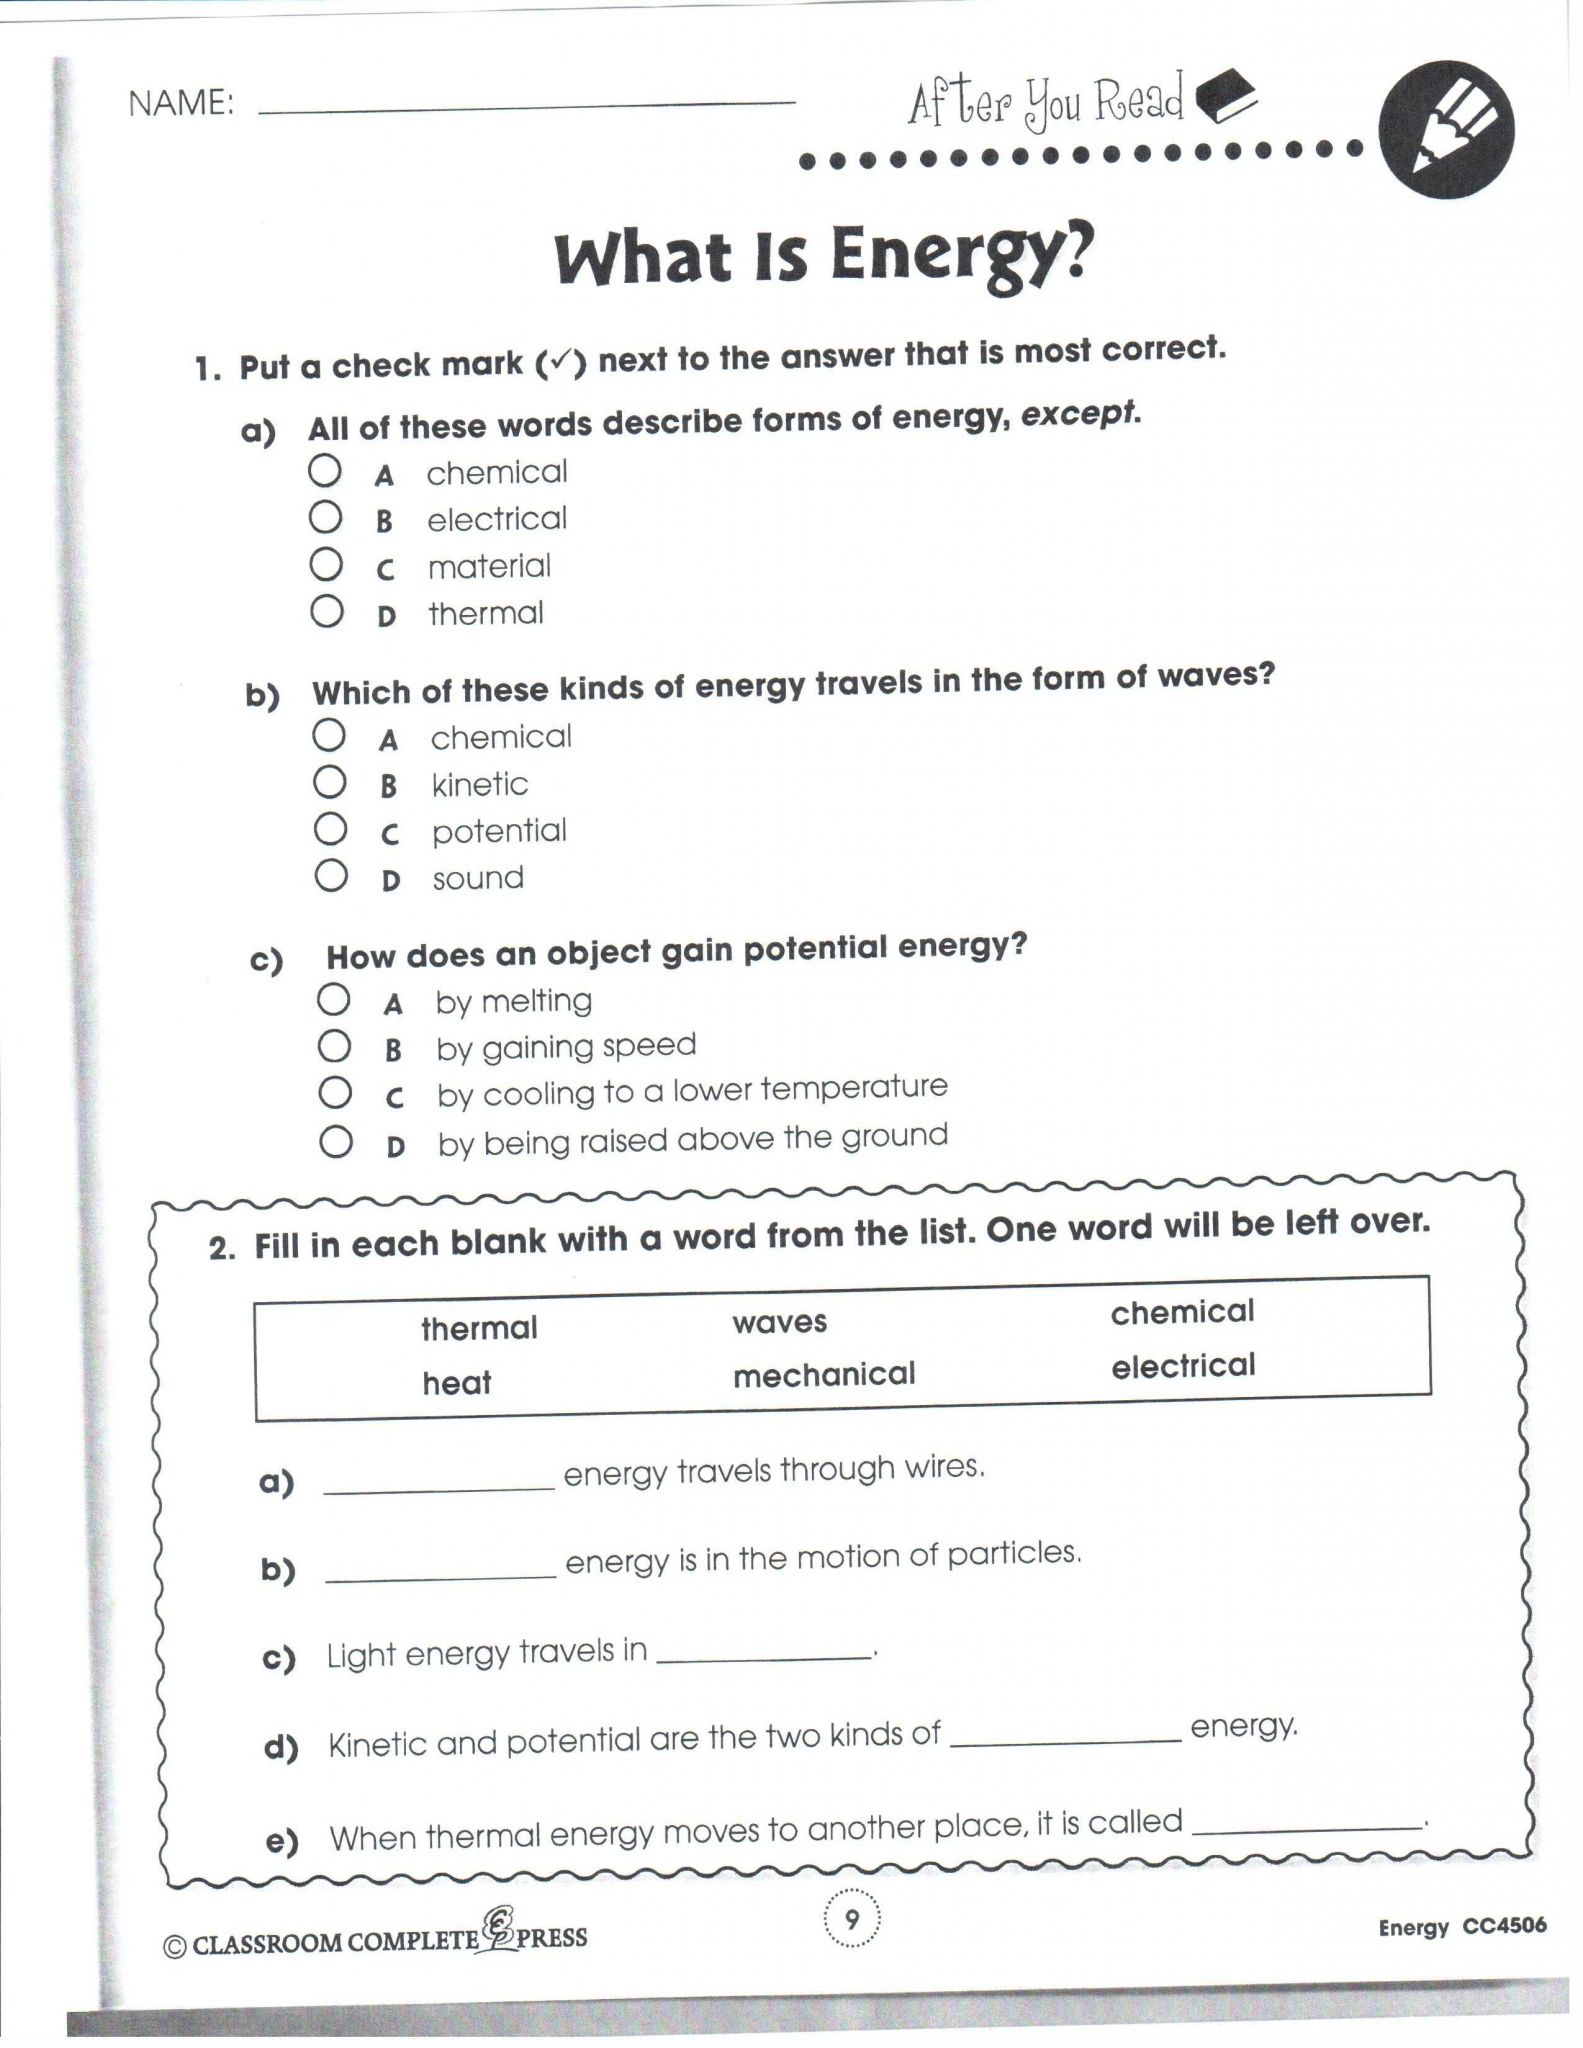 Skills Worksheet Concept Review Answer Key Holt Environmental Science Along with Skills Worksheet Concept Review Answers Best Physical Science